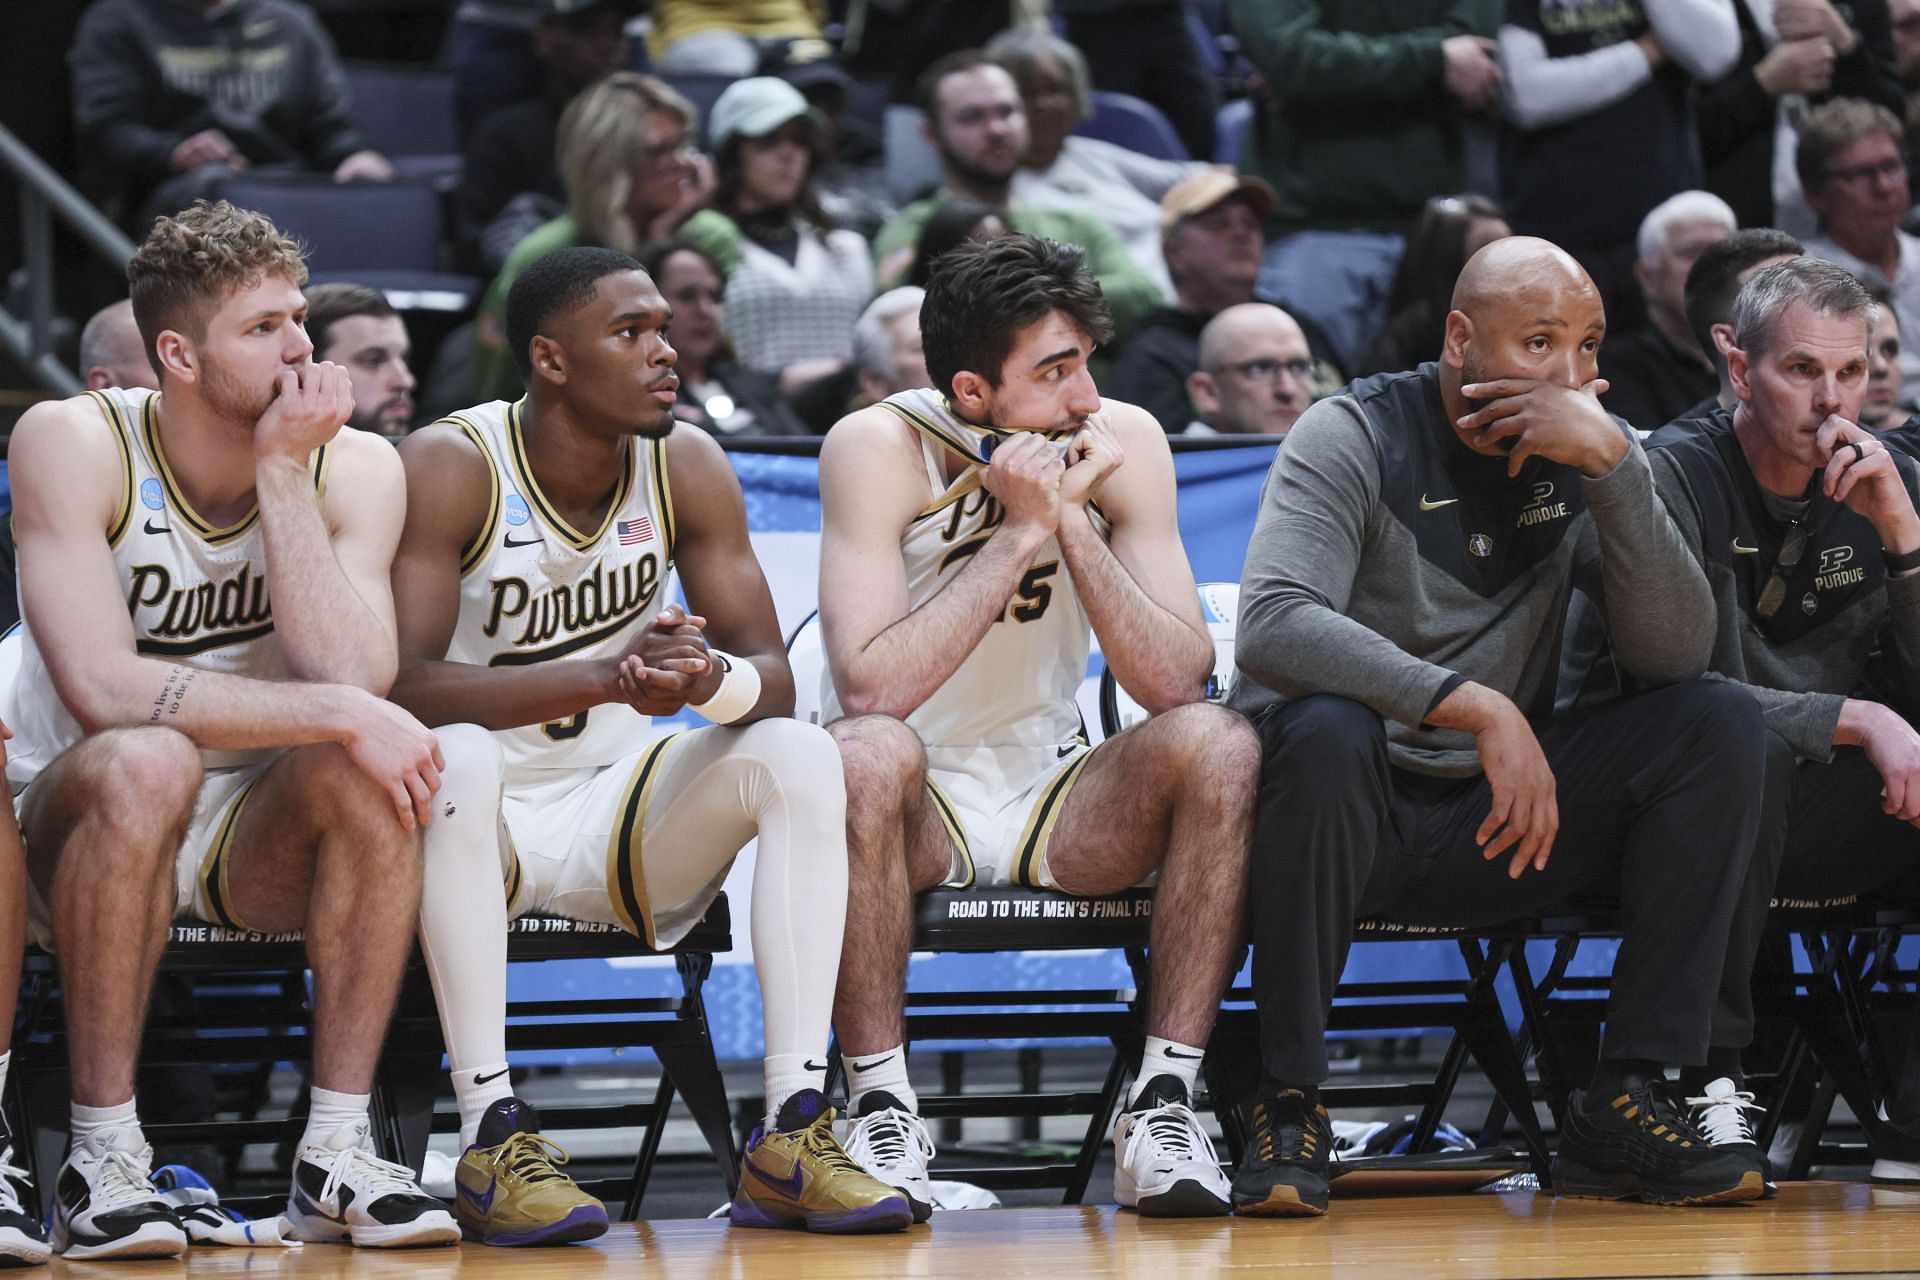 The Purdue bench reacts to the second half against Fairleigh Dickinson